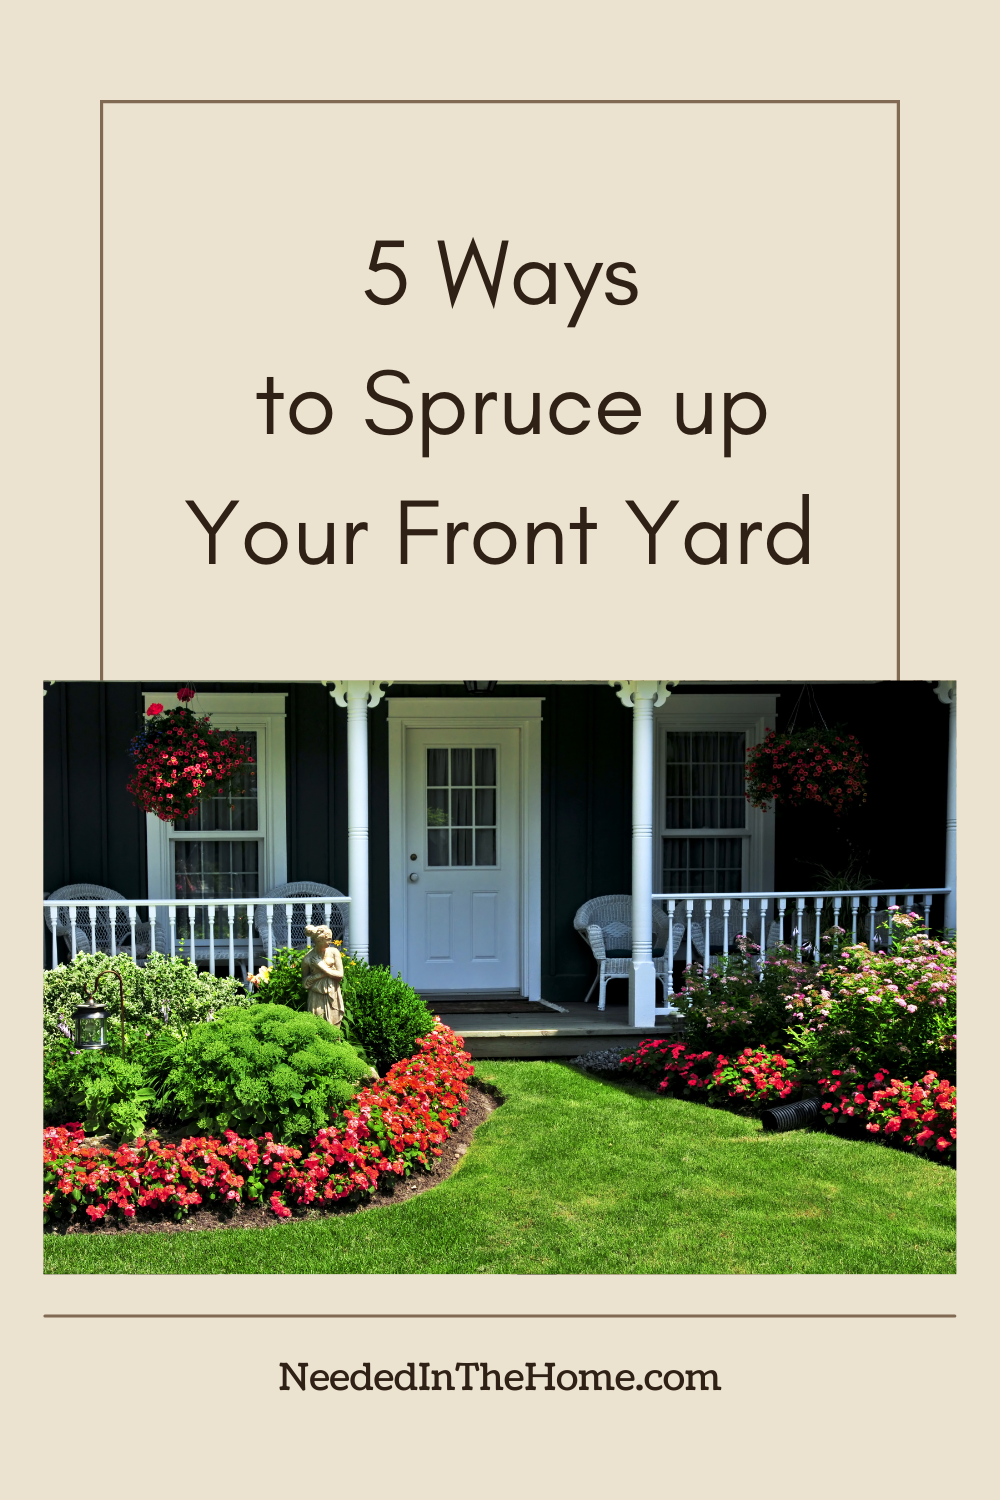 pinterest-pin-description 5 ways to spruce up your front yard front exterior of home plants flowers porch neededinthehome